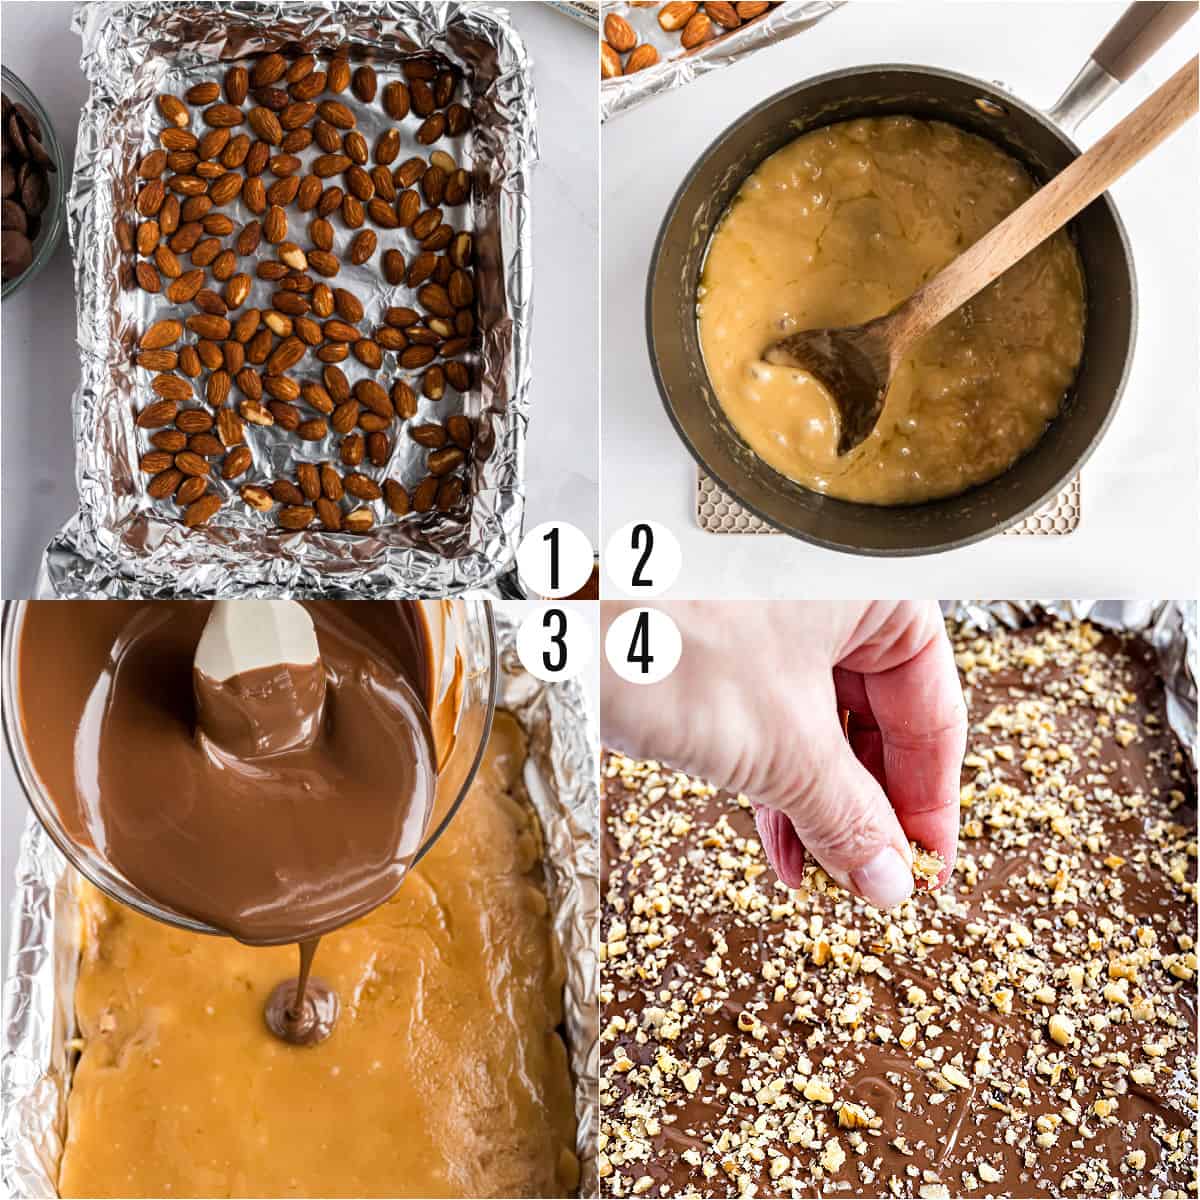 Step by step photos showing how to make english toffee.